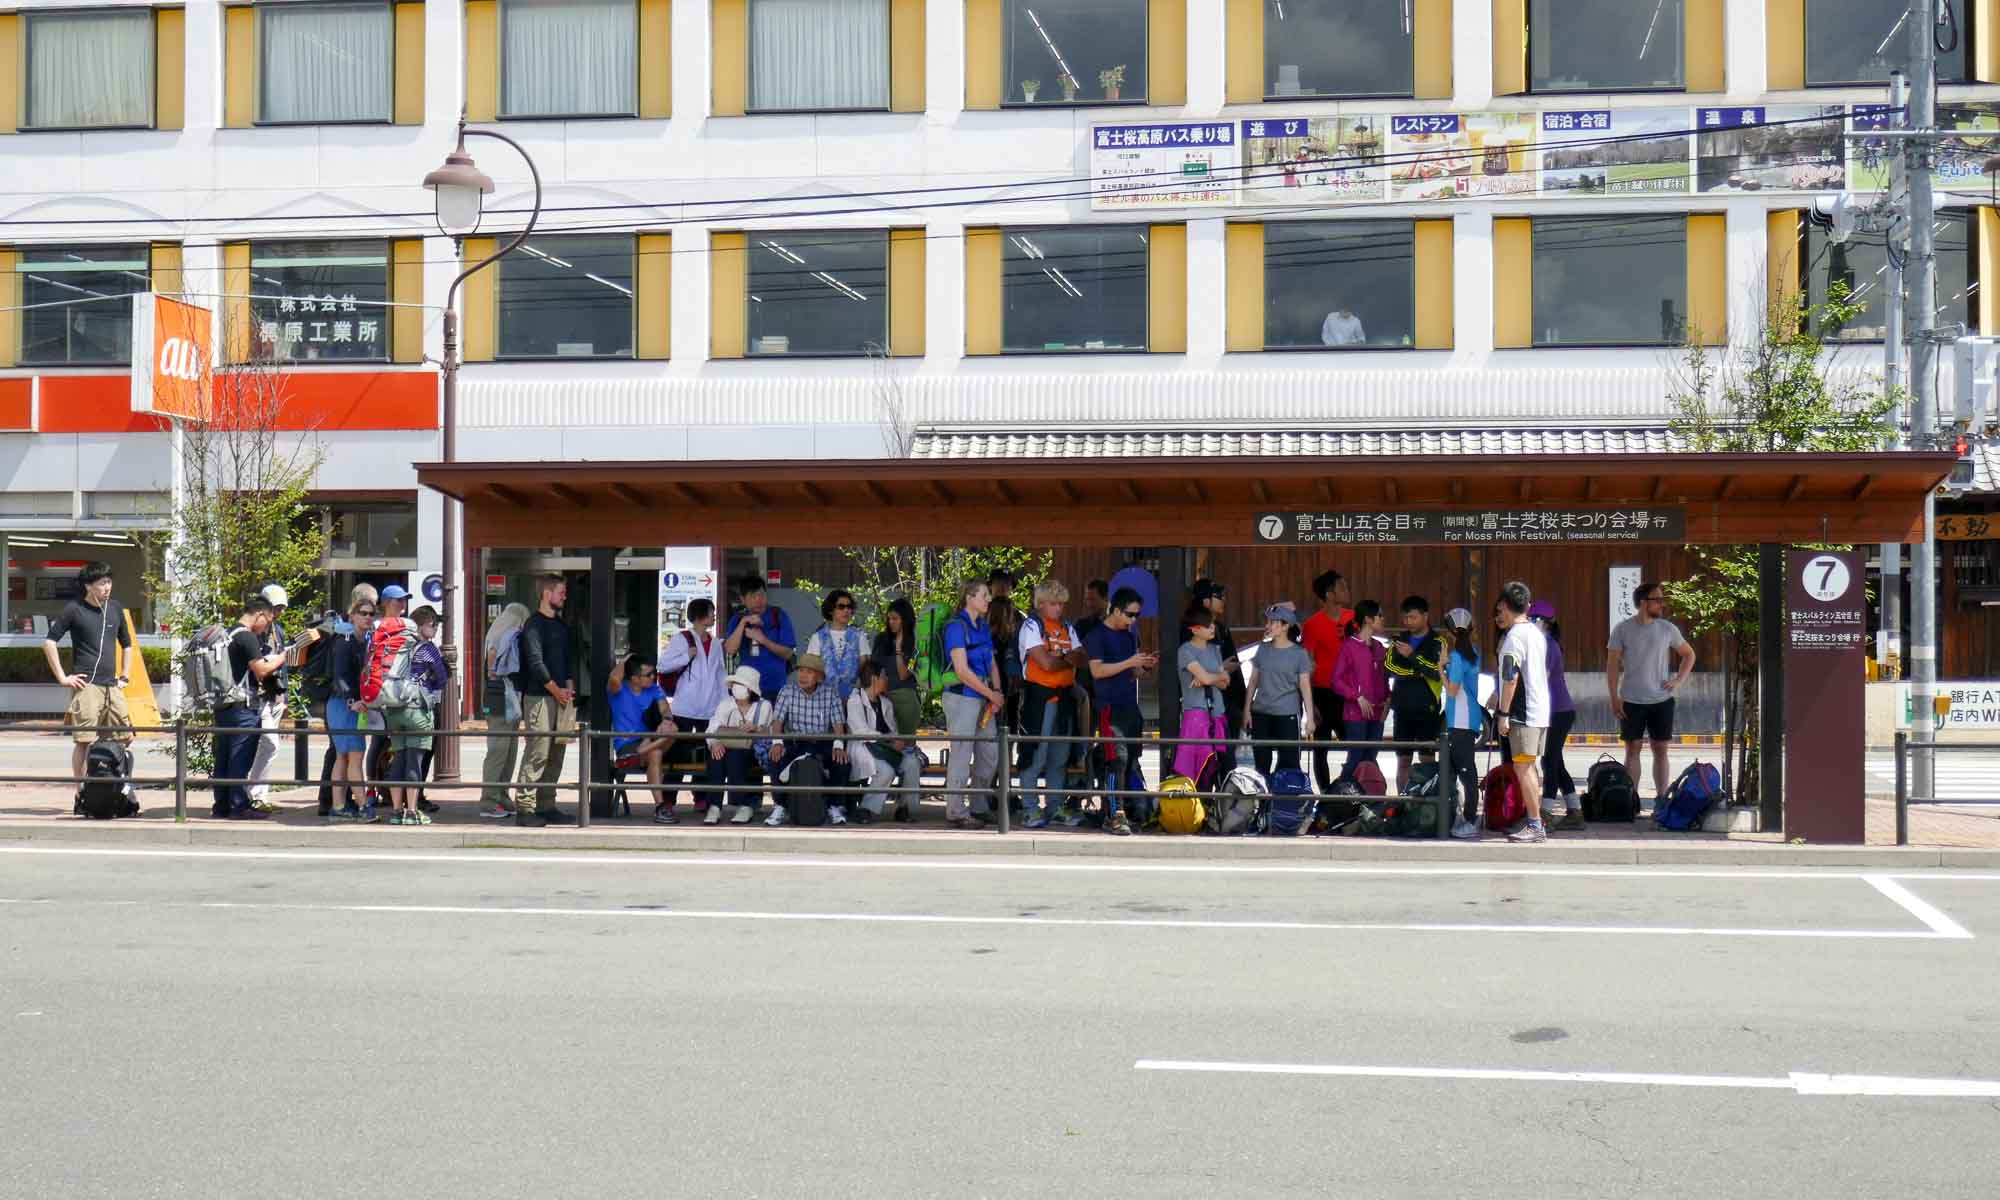 People waiting for the bus to Mount Fuji 5th station